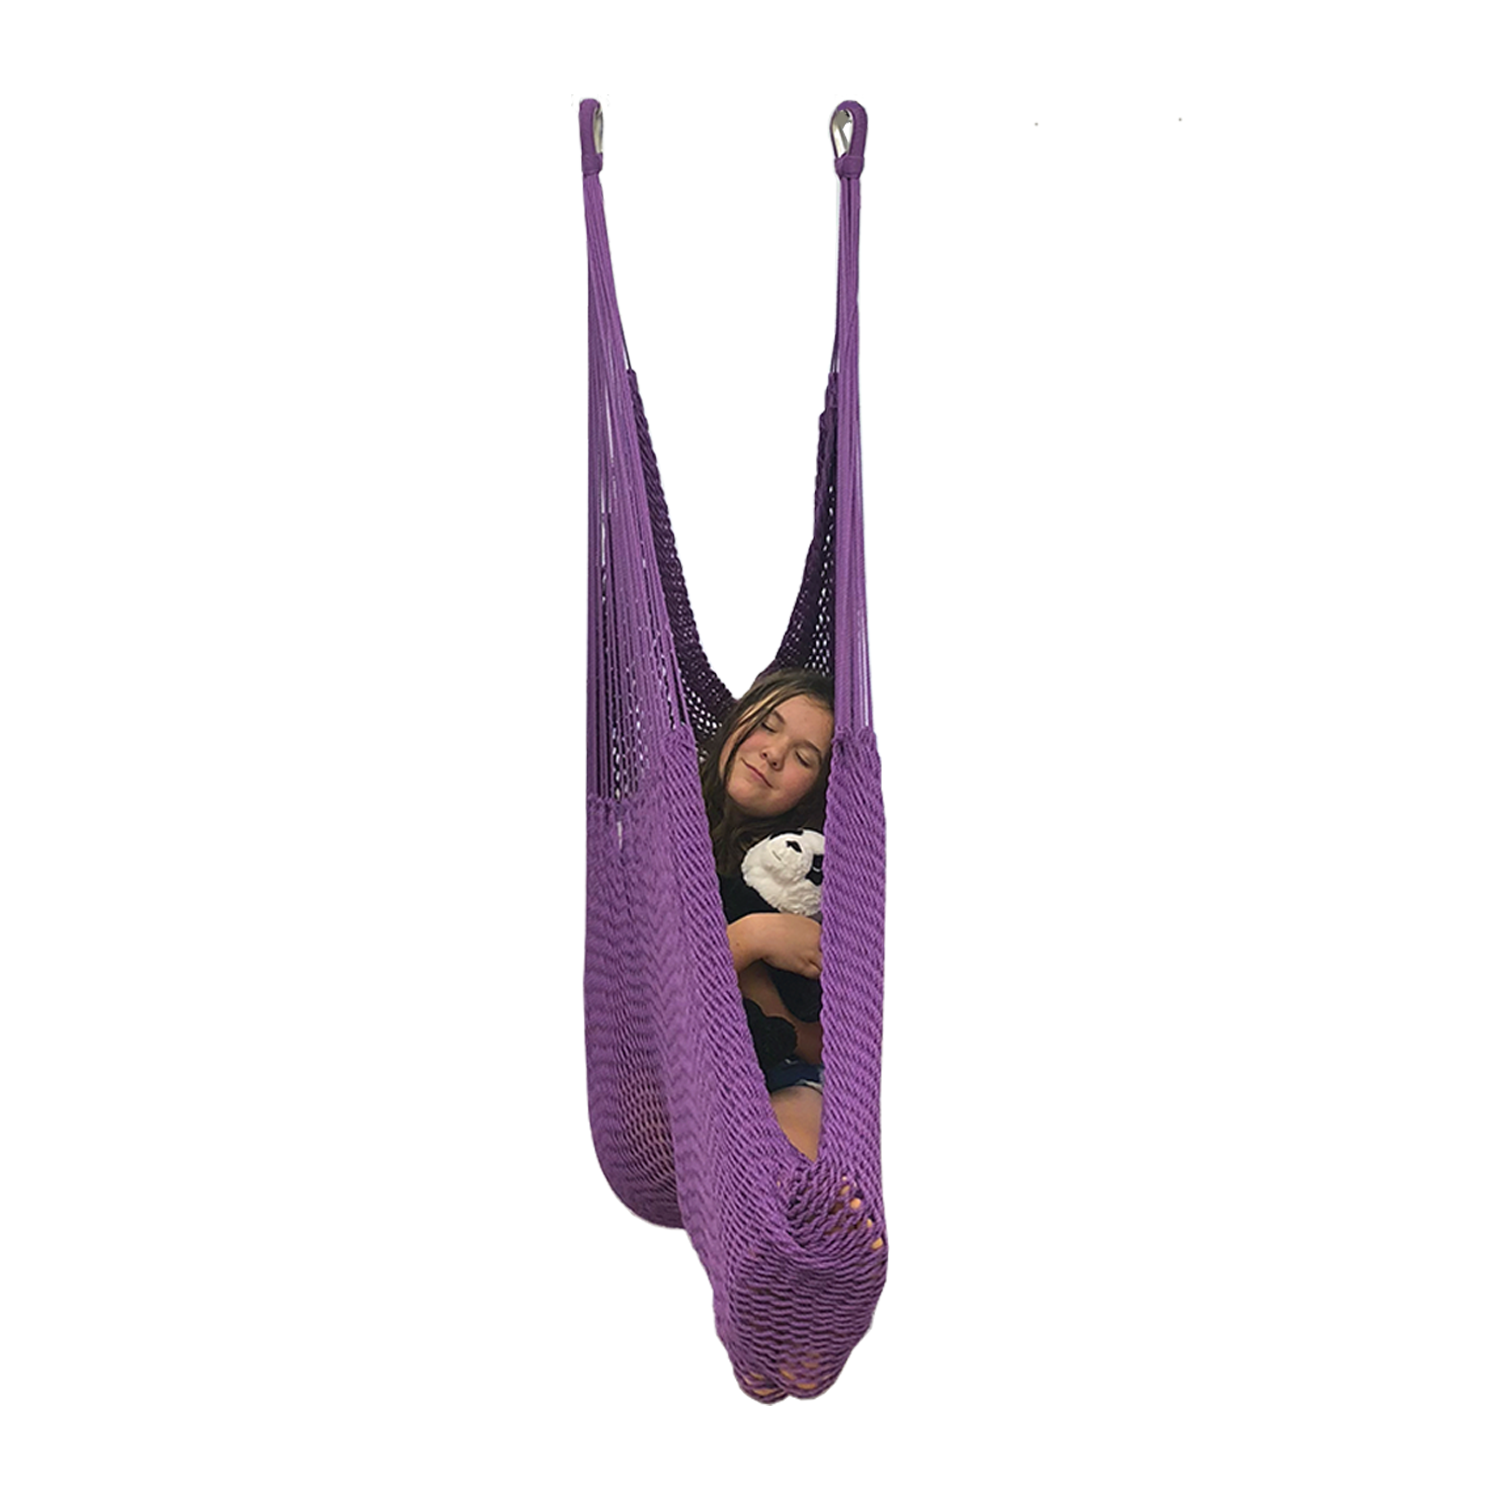 A girl is resting in a purple hammock swing with her plush toy panda bear.